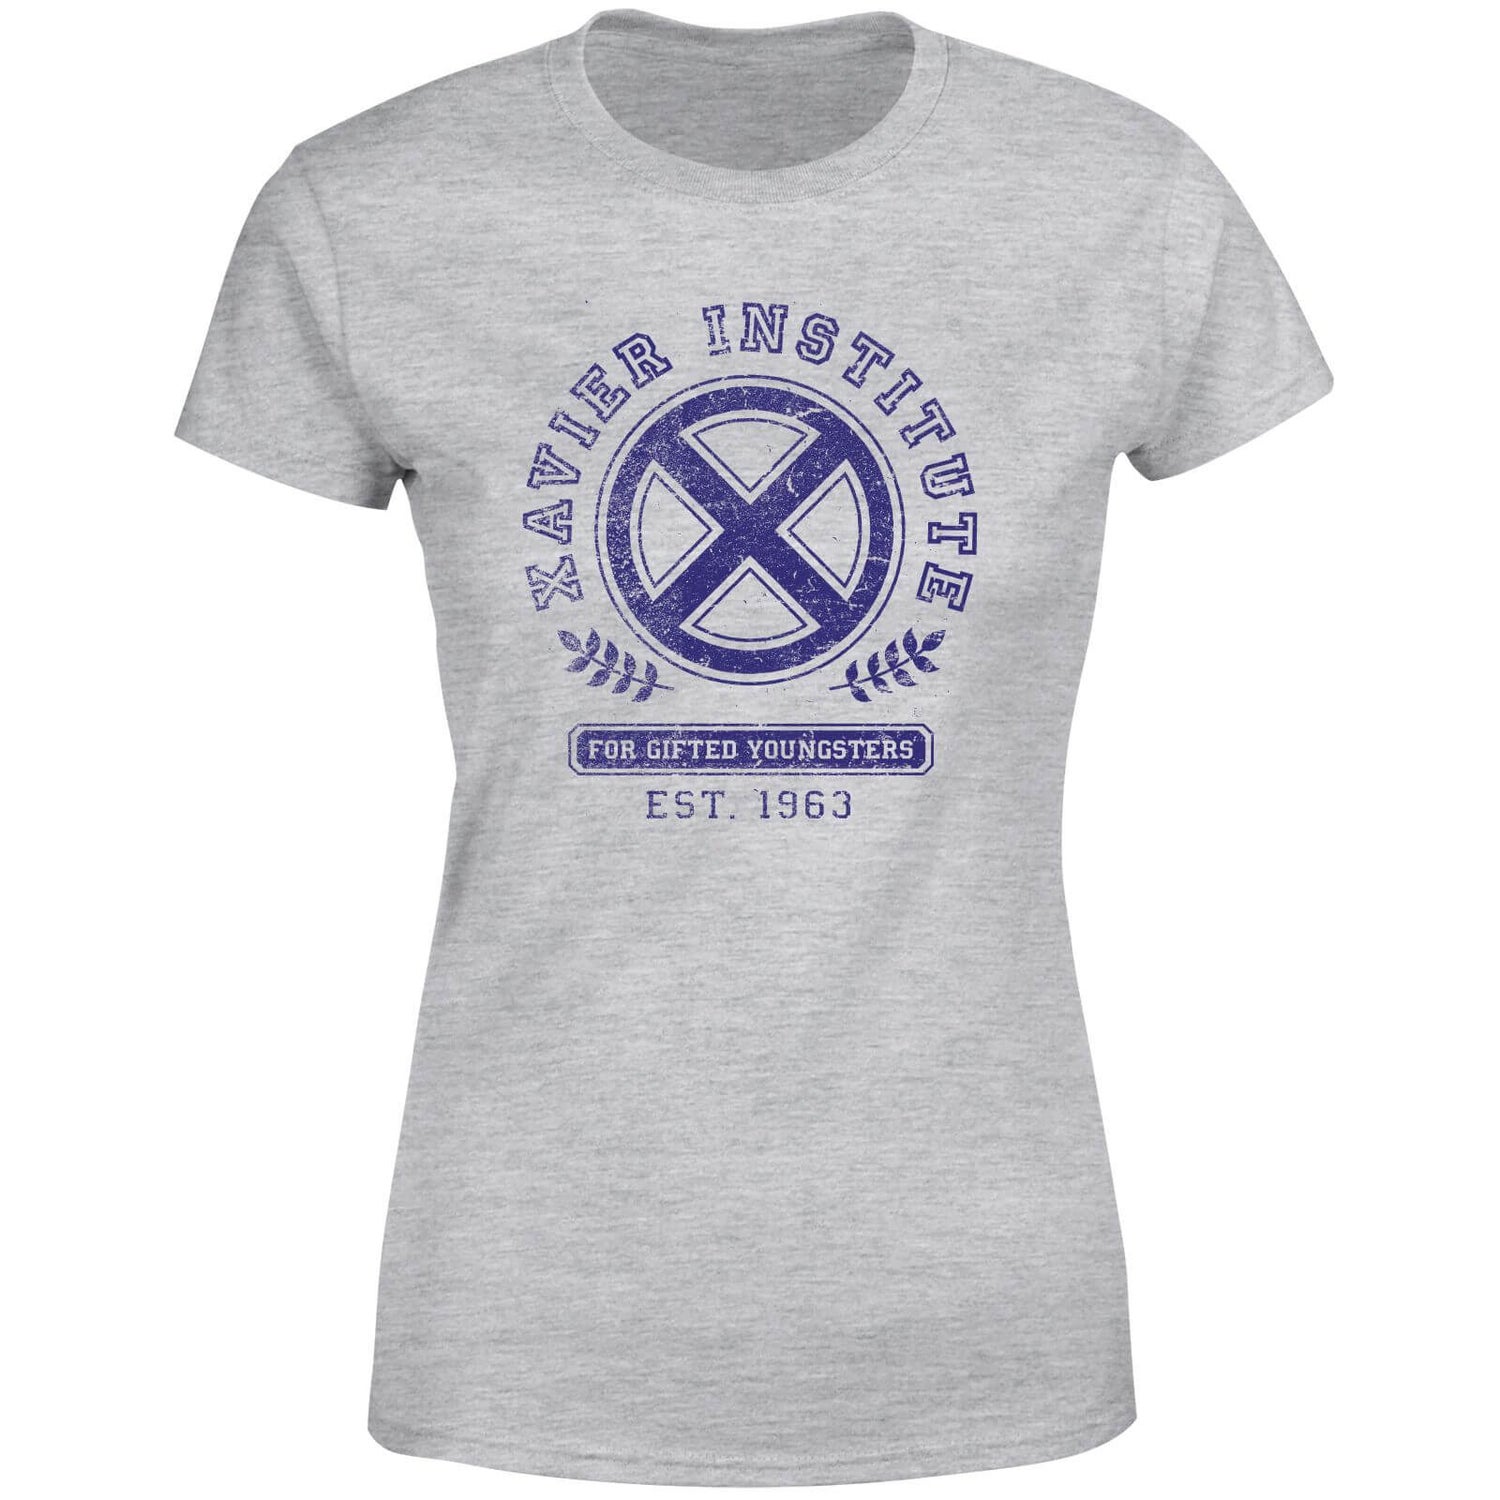 X-Men Xavier Institute For Gifted Youngsters Women's T-Shirt - Grey